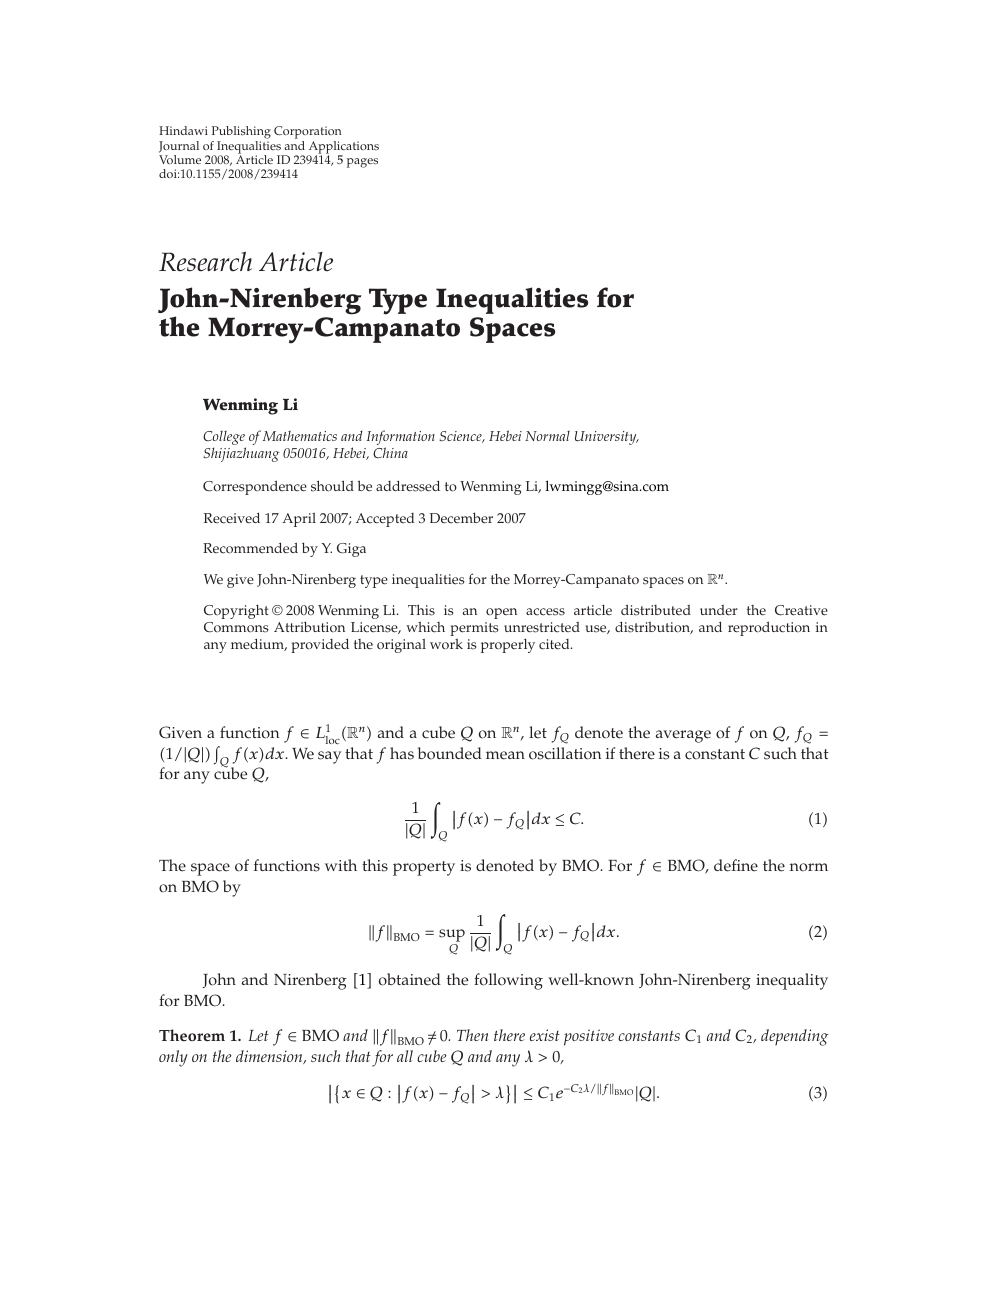 John Nirenberg Type Inequalities For The Morrey Campanato Spaces Topic Of Research Paper In Mathematics Download Scholarly Article Pdf And Read For Free On Cyberleninka Open Science Hub